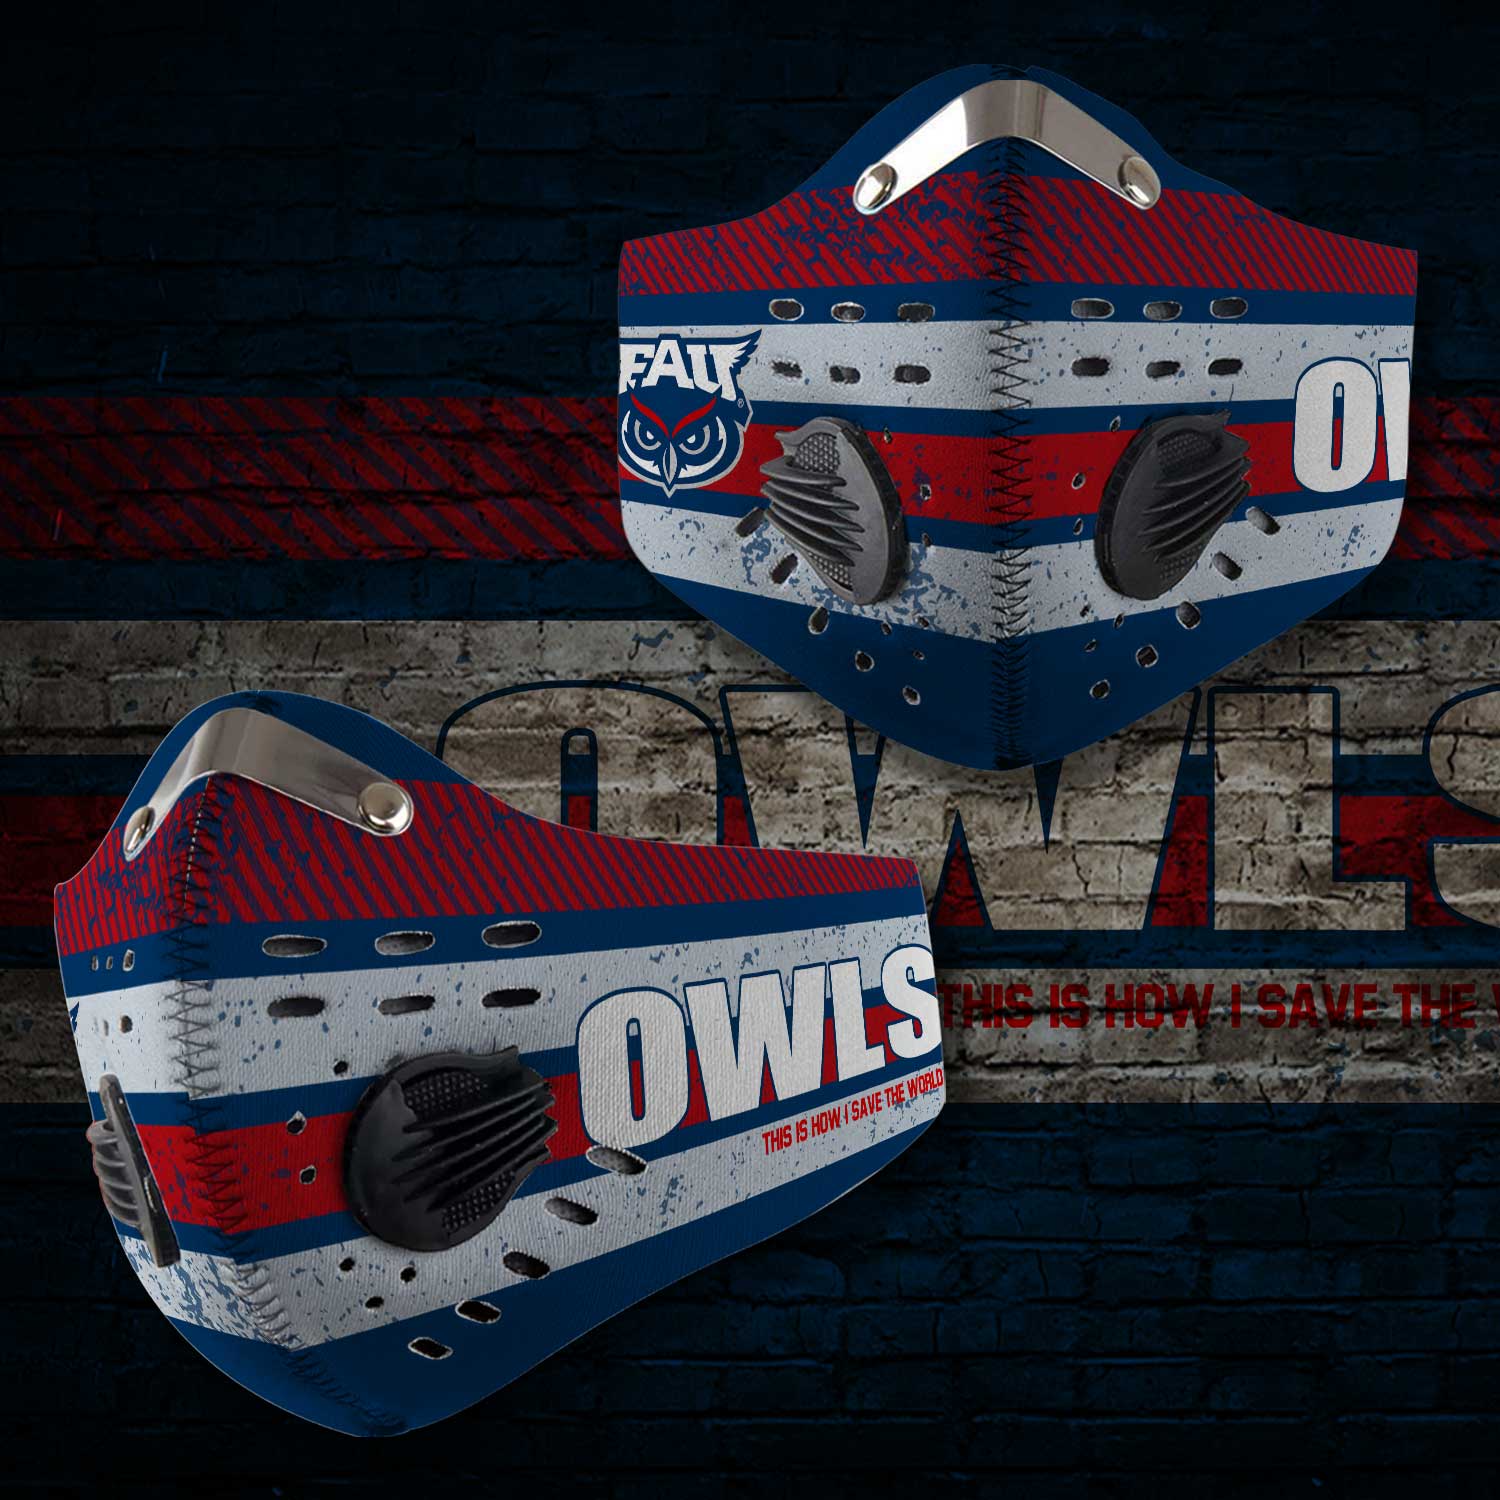 Florida atlantic owls this is how i save the world face mask 2